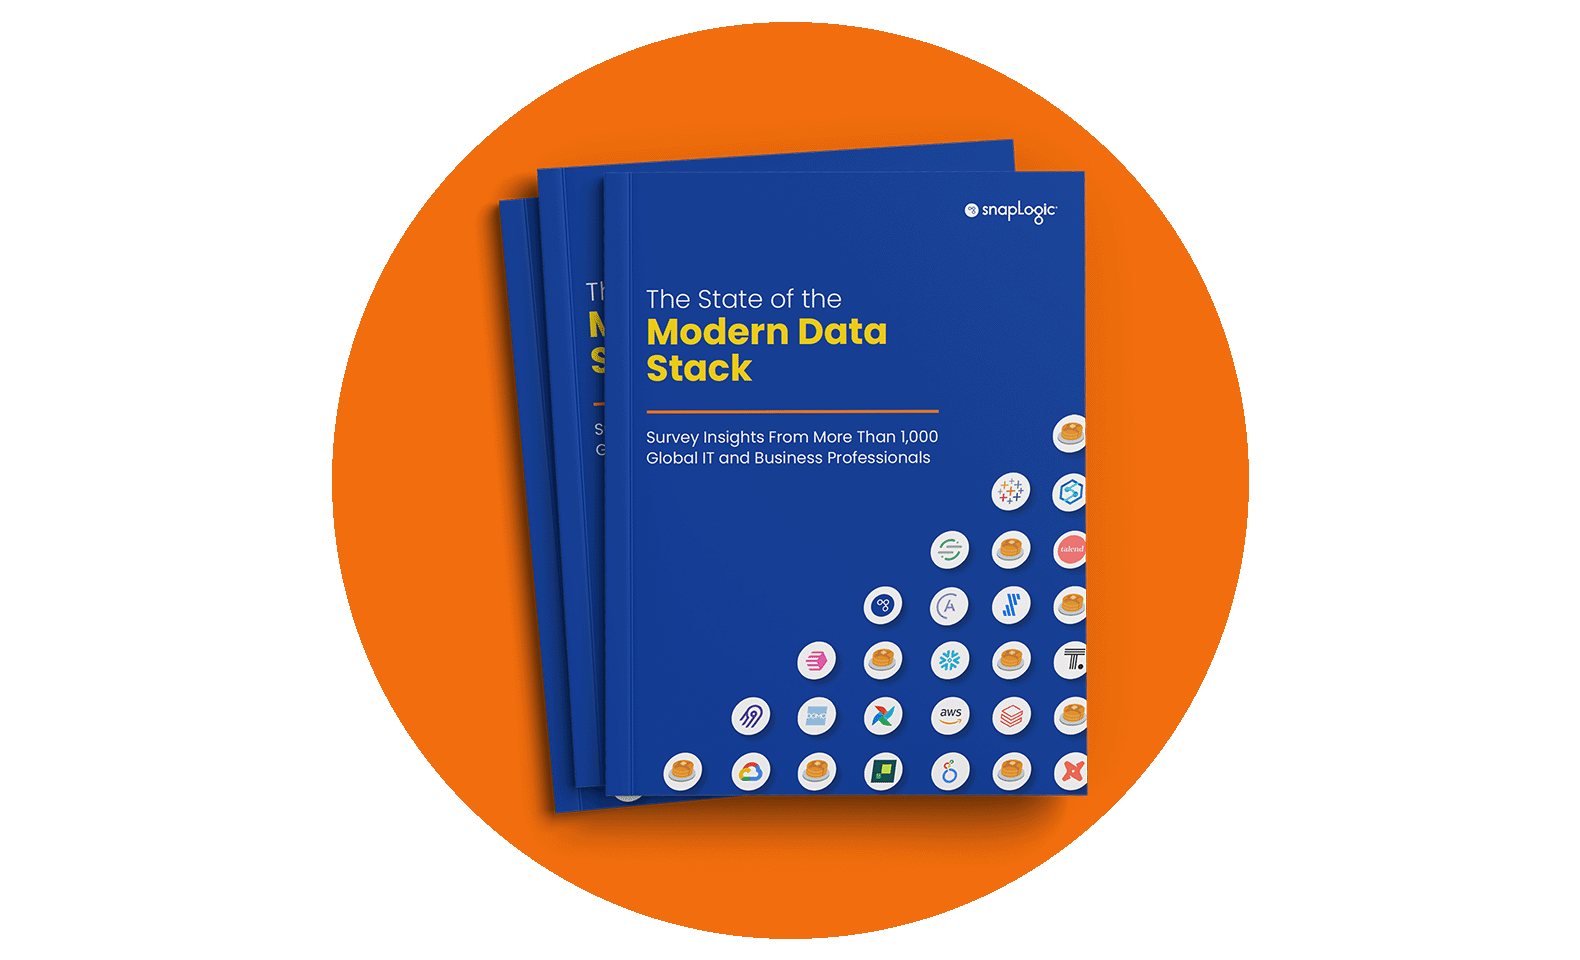 The State of the Modern Data Stack report rendering